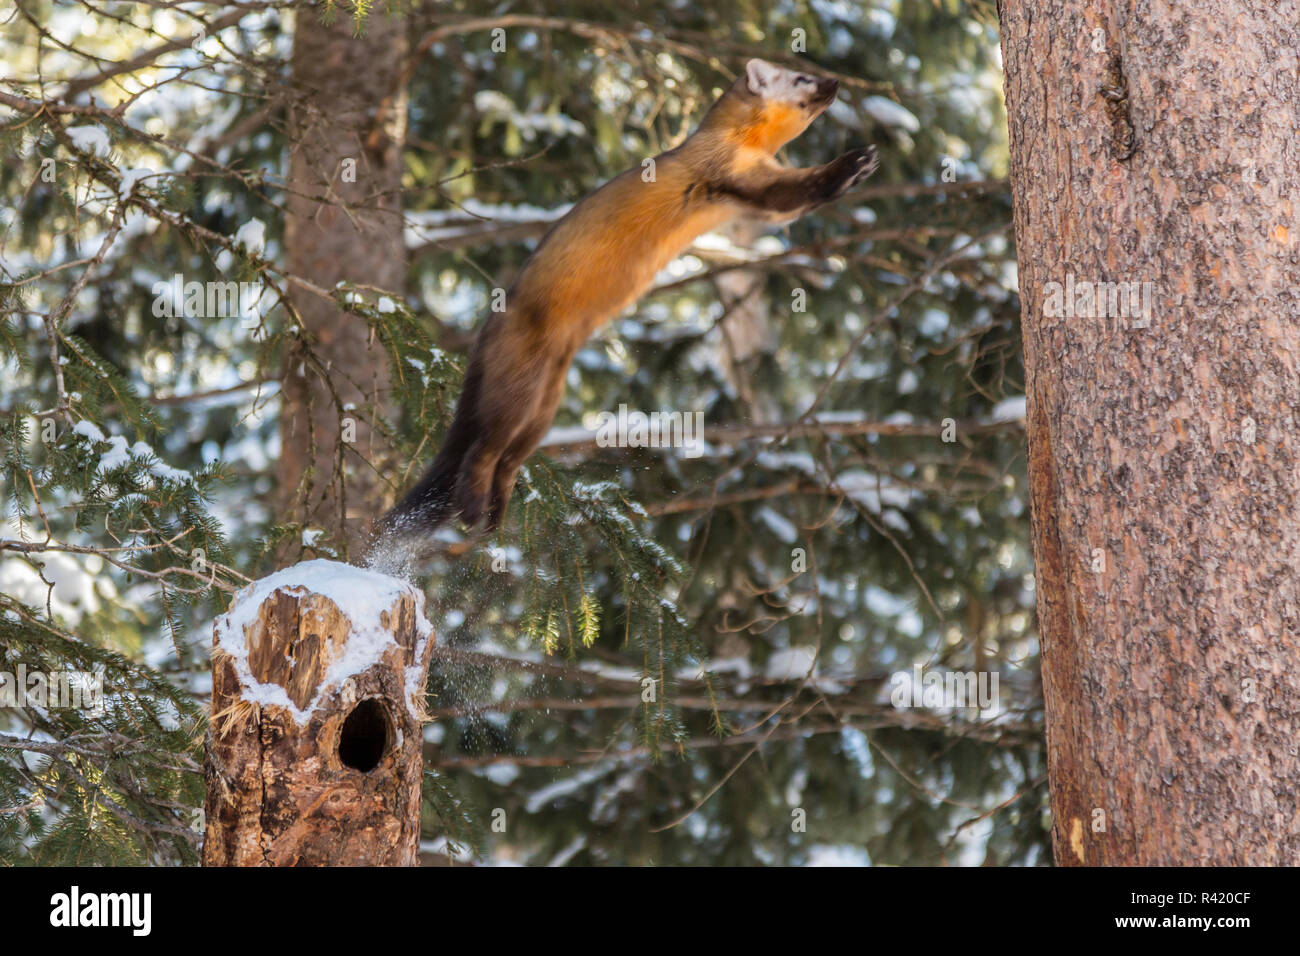 USA, Montana, Shoshone National Forest. Pine marten leaping. Stock Photo